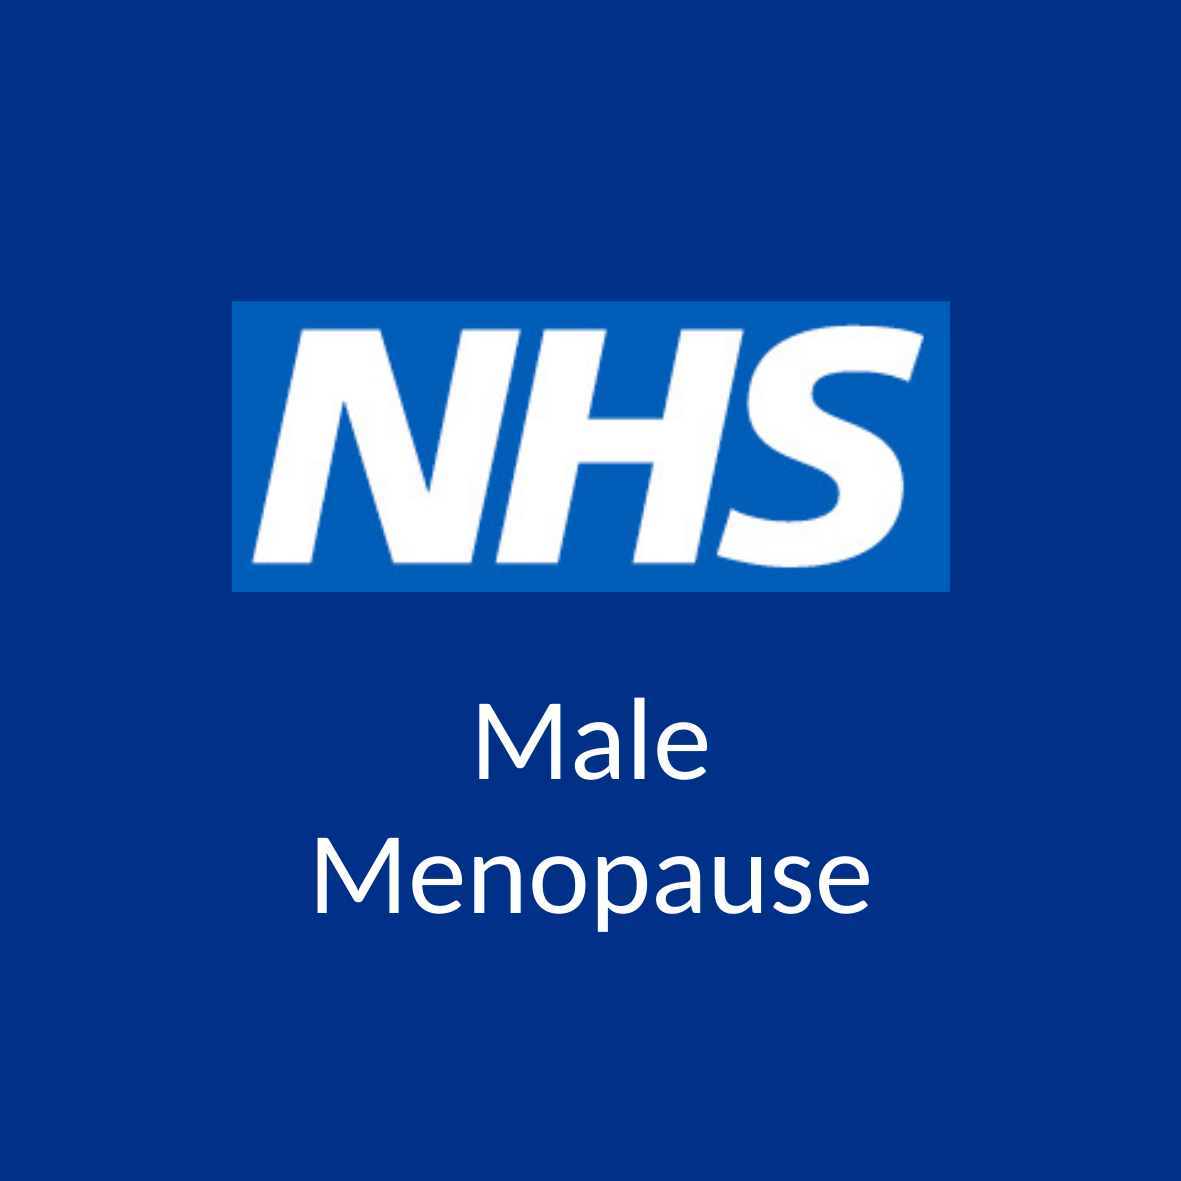 NHS Logo and Words 'Male Menopause'